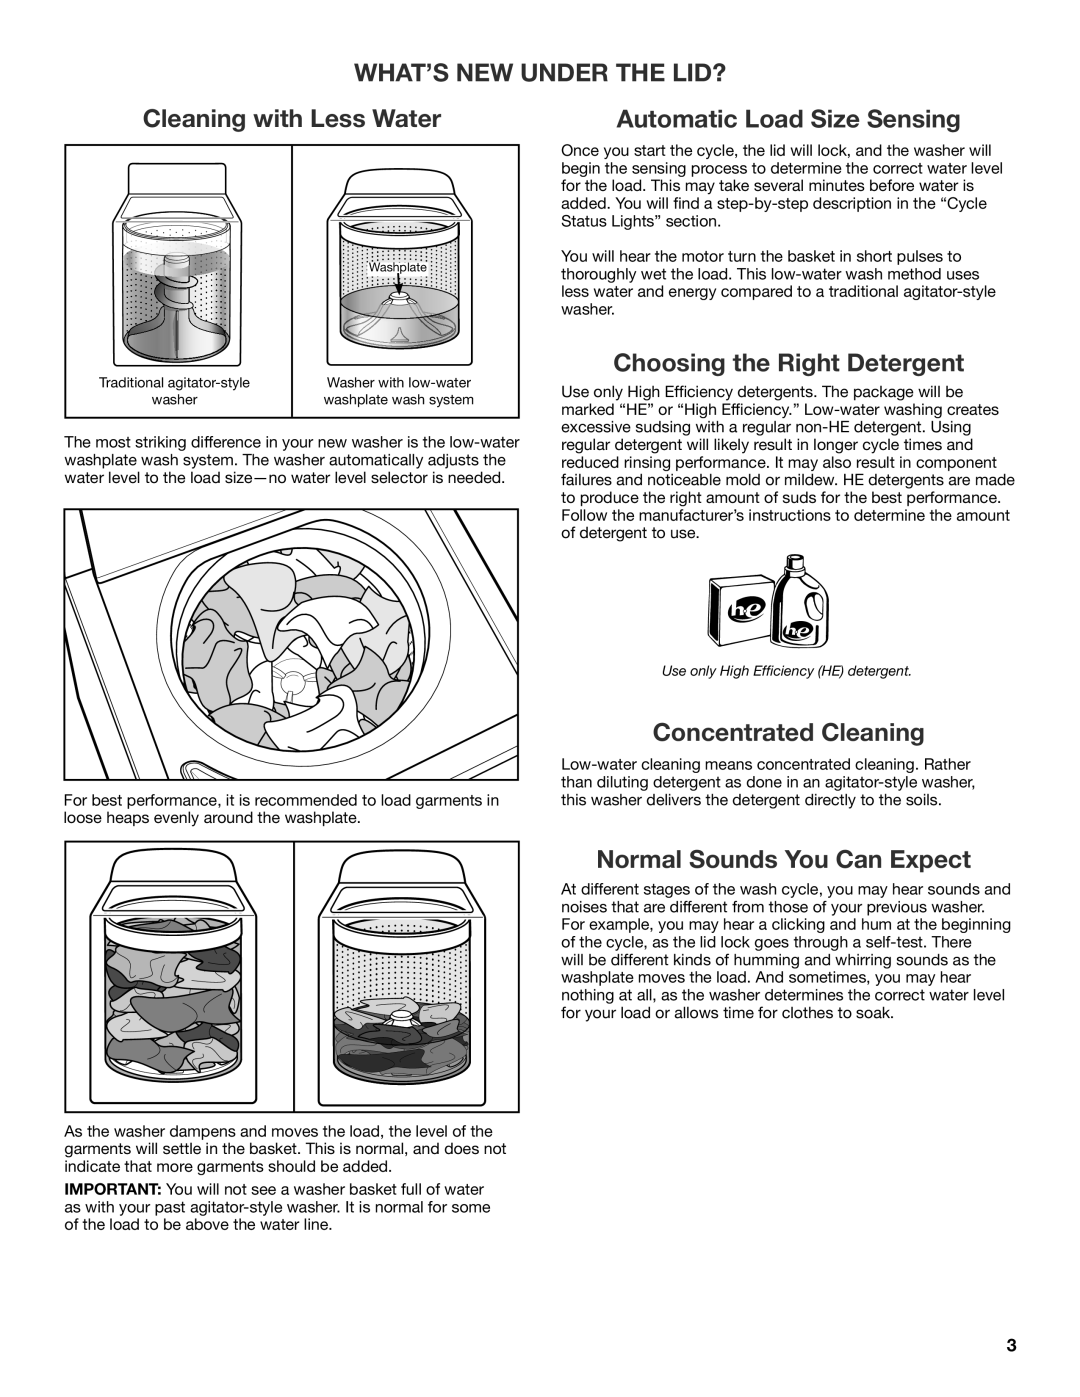 Maytag W10560155B What’S New Under The Lid?, Cleaning with Less Water, Choosing the Right Detergent, Concentrated Cleaning 